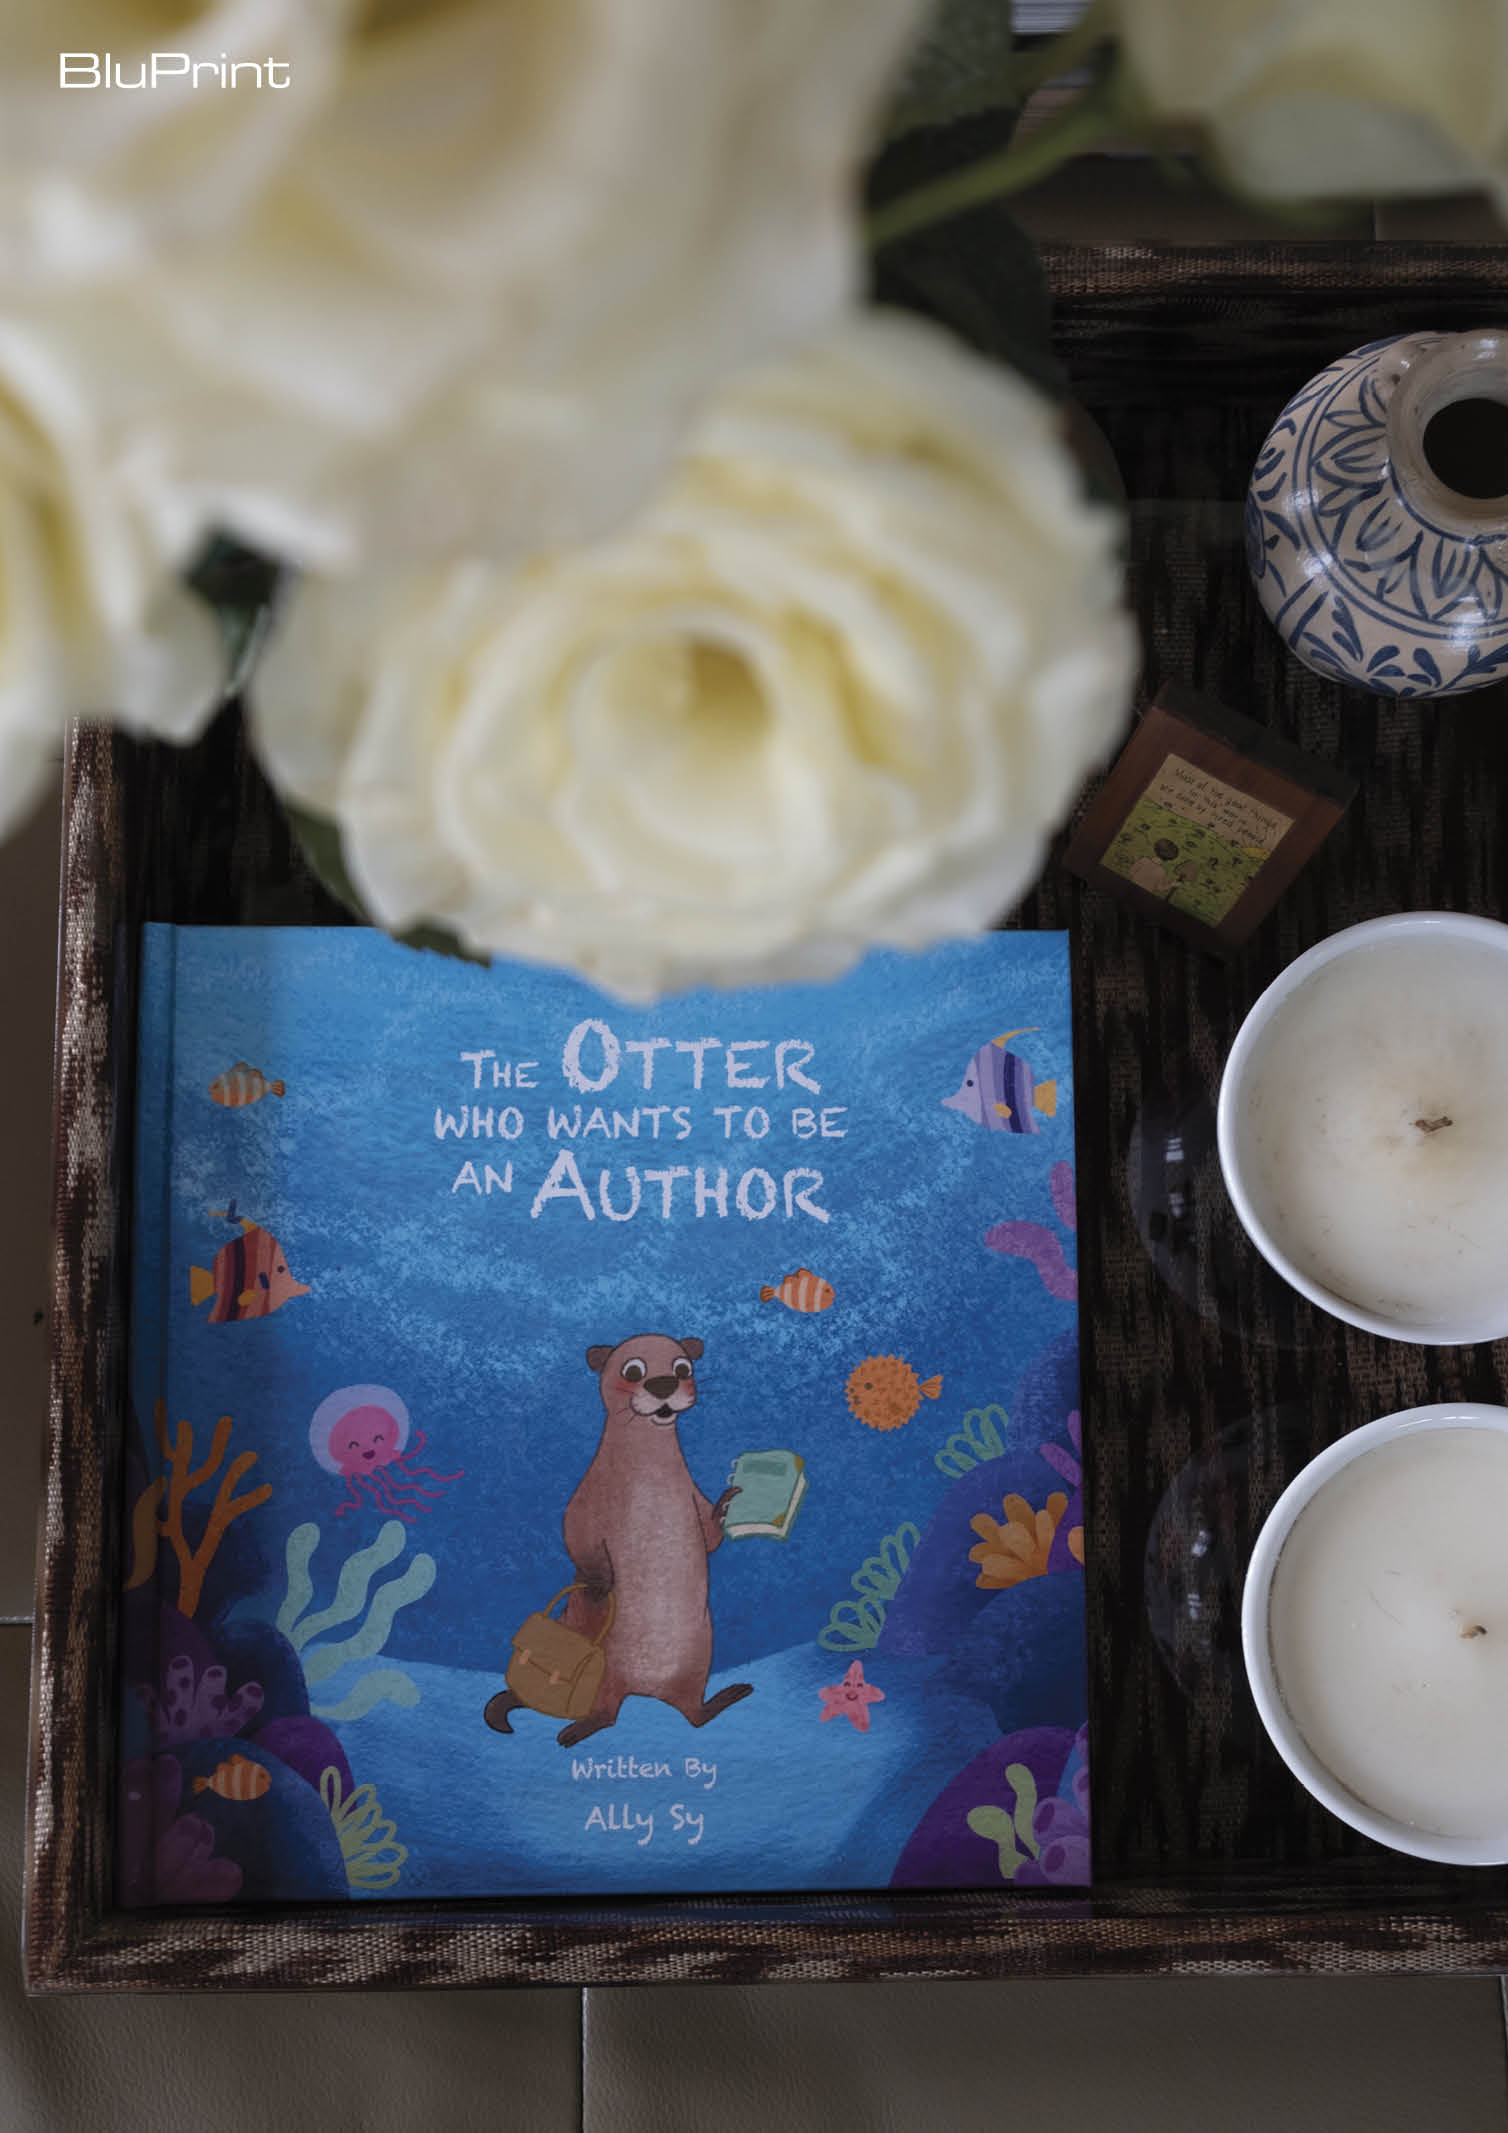 Image of a book cover of the "The Otter Who Wants to Be an Author" next to candles and a floral arrangement